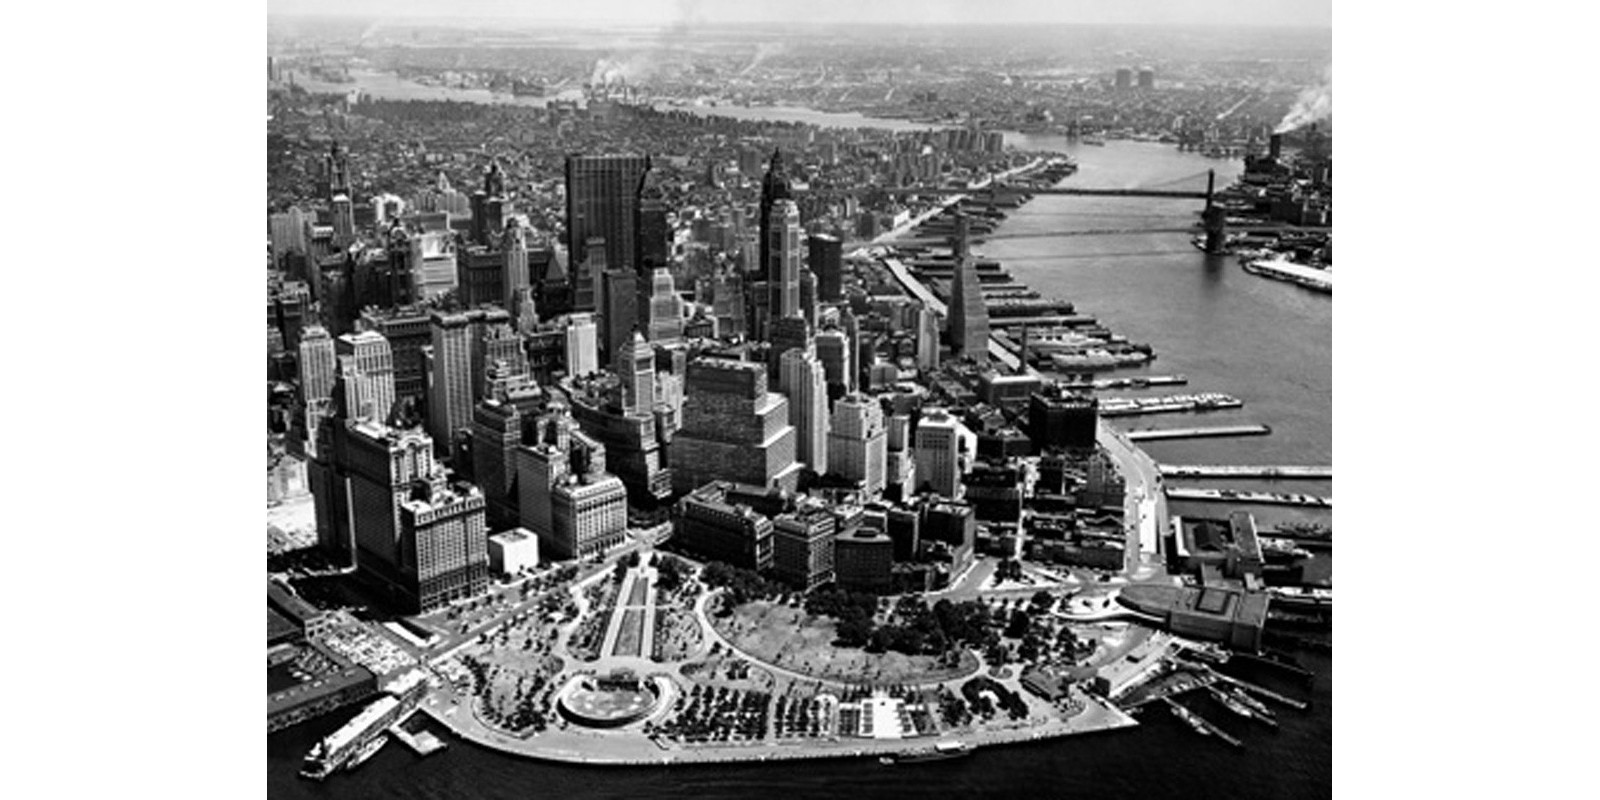 Anonymous - Aerial View of Manhattan